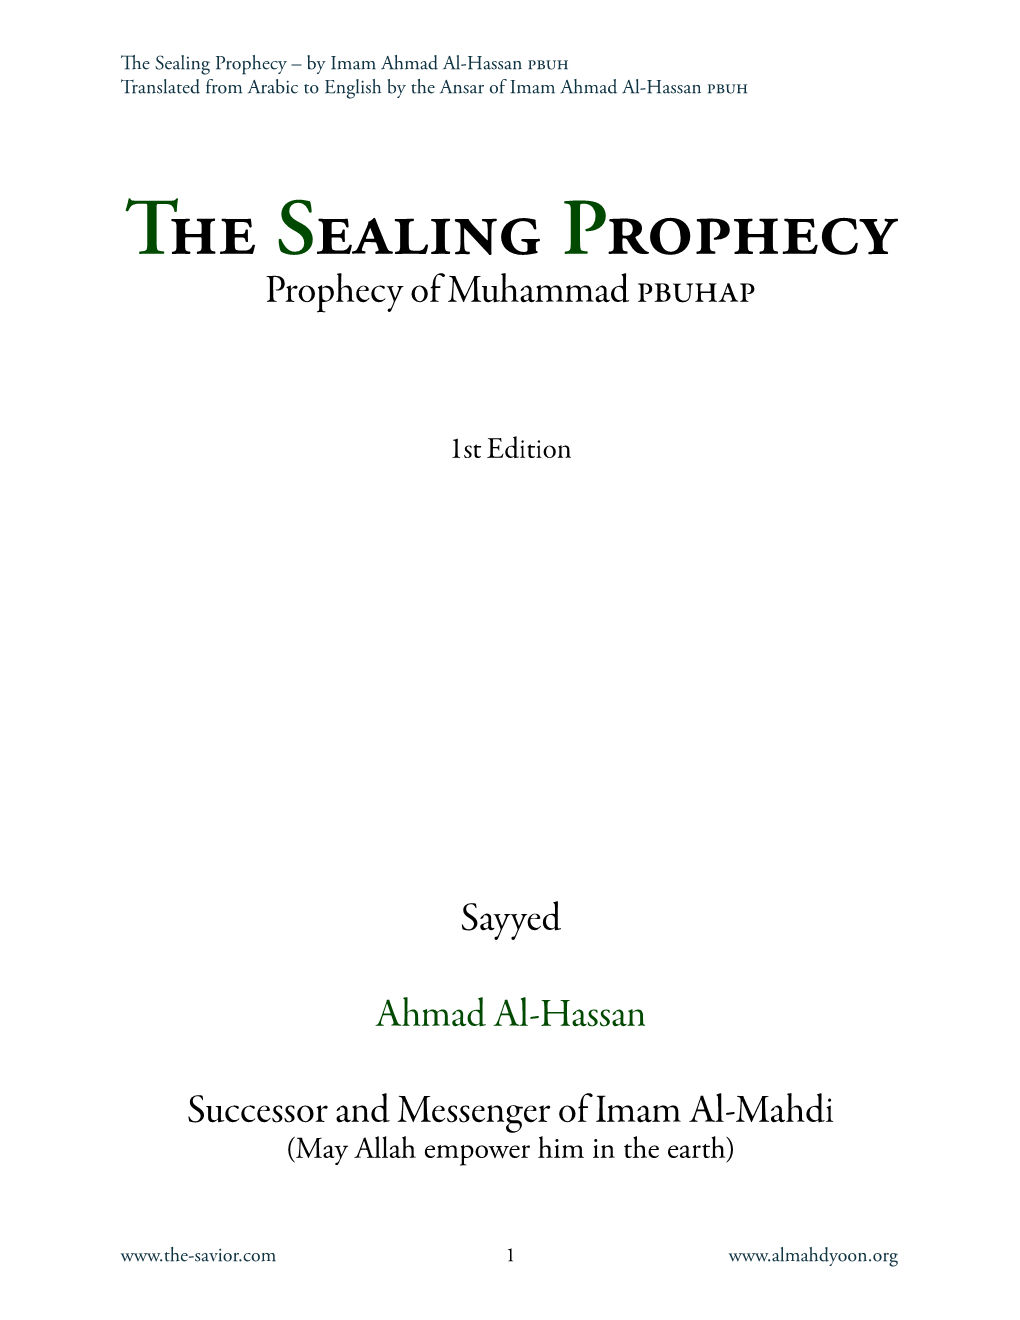 The Sealing Prophecy – by Imam Ahmad Al-Hassan Pbuh Translated from Arabic to English by the Ansar of Imam Ahmad Al-Hassan Pbuh